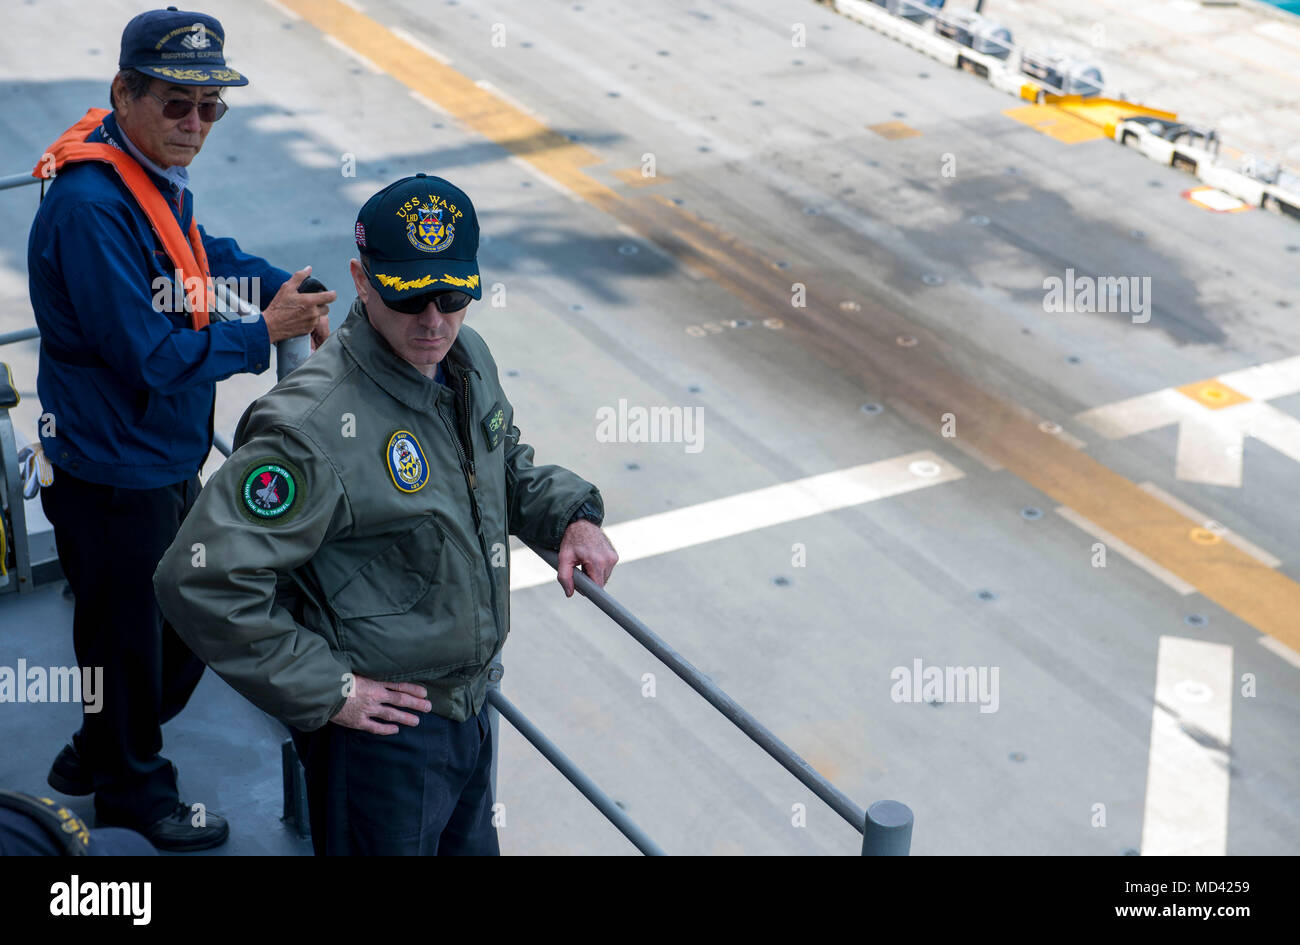 180319-N-VK310-0009 OKINAWA, Japan (March 19, 2018) Capt. John Howard, Commanding Officer of the amphibious assault ship USS Wasp (LHD 1), takes charge during the ship's departure from Okinawa. Wasp, part of the Wasp Expeditionary Strike Group, with embarked 31st Marine Expeditionary Unit, is operating in the Indo-Pacific region to enhance interoperability with partners, serve as a ready-response force for any type of contingency, and advance the Up-Gunned ESG concept. (U.S. Navy photo by Mass Communication Specialist 3rd Class Michael Molina/Released) Stock Photo